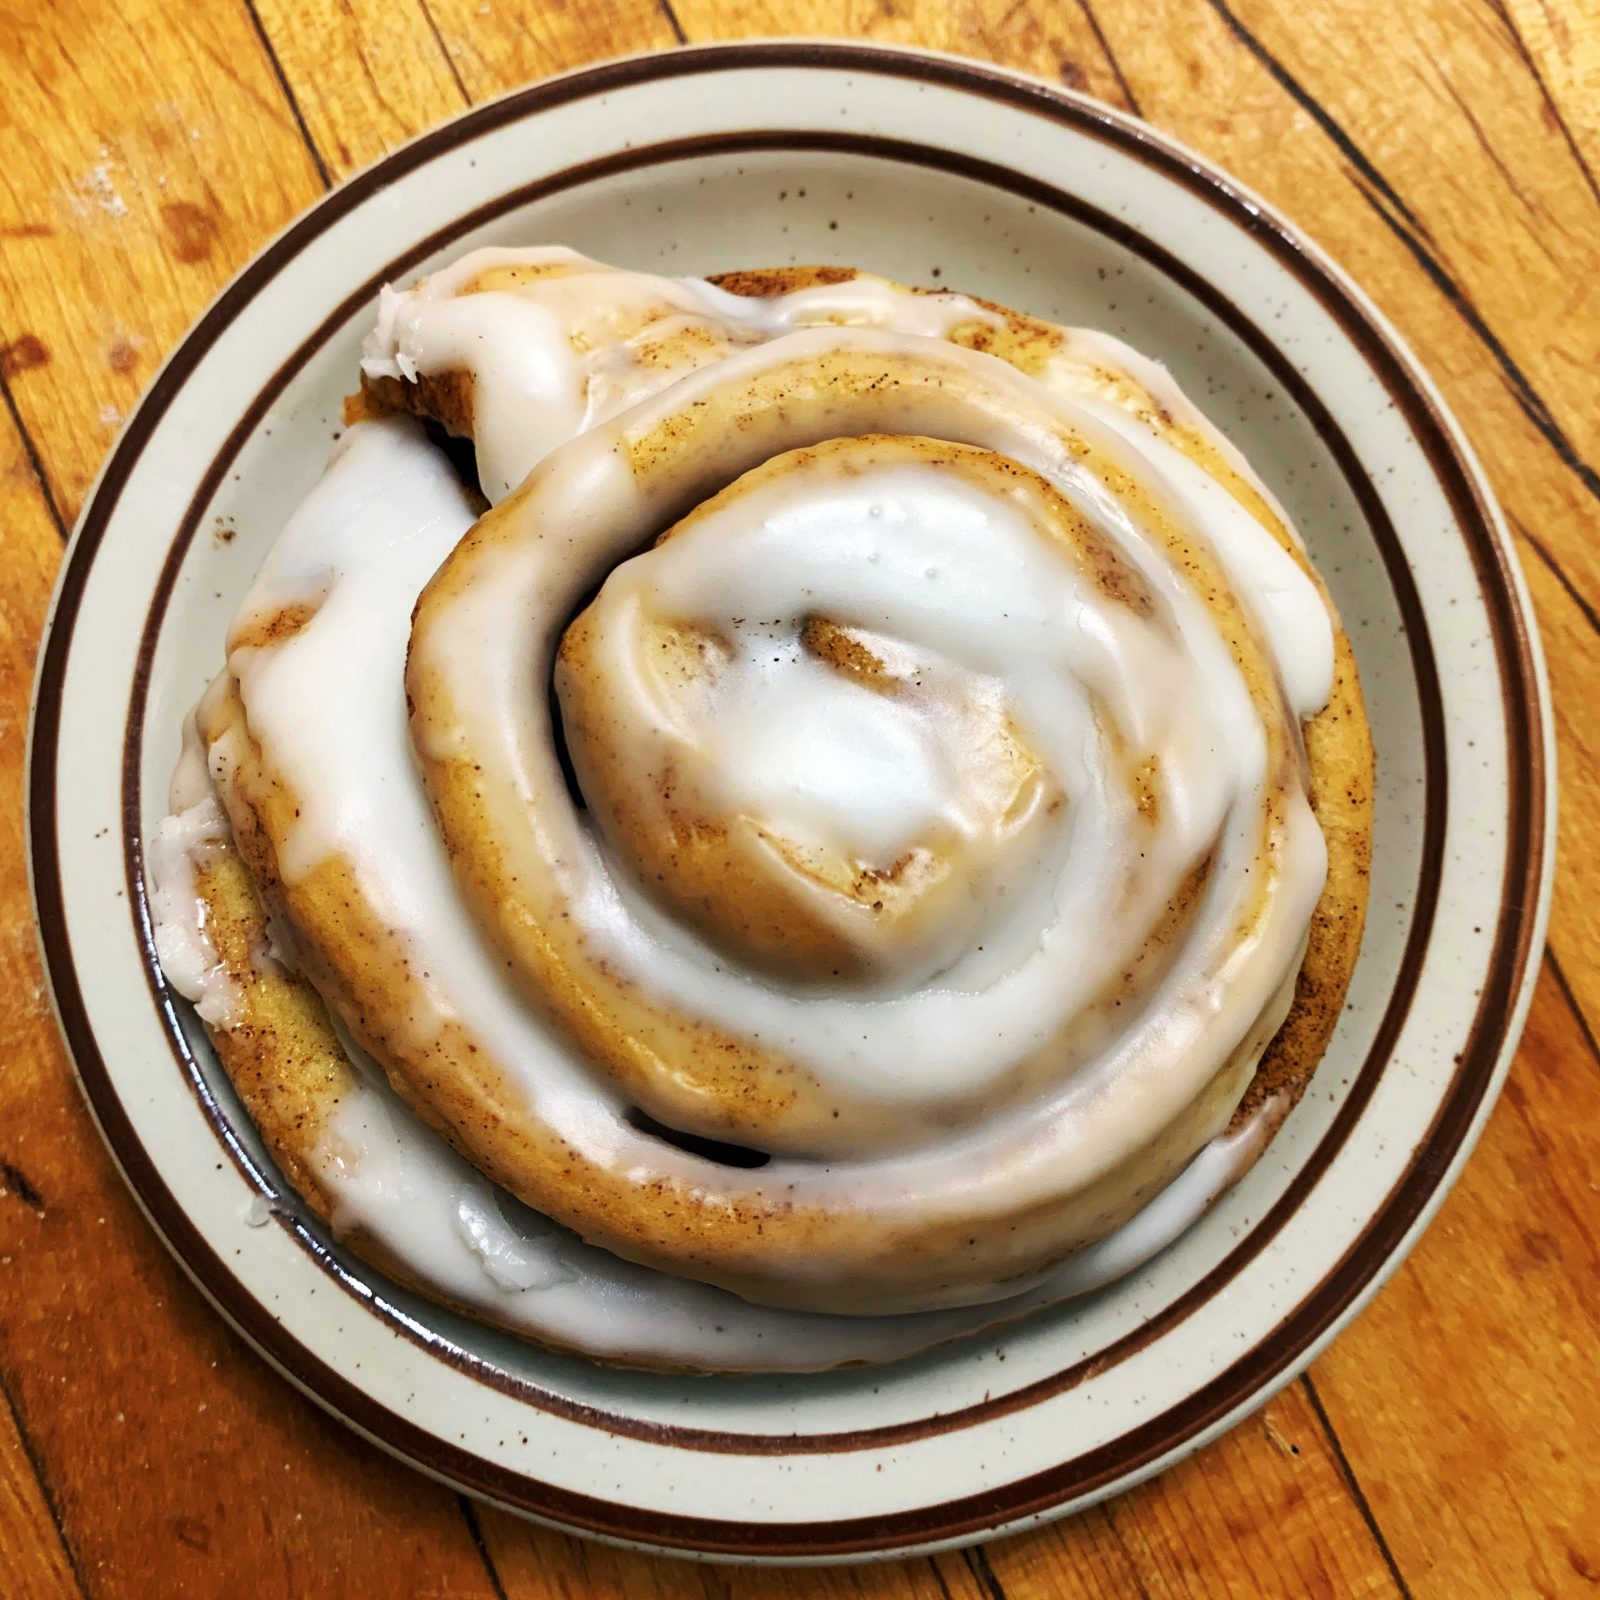 A cinnamon roll is sitting on a plate on a wooden table.